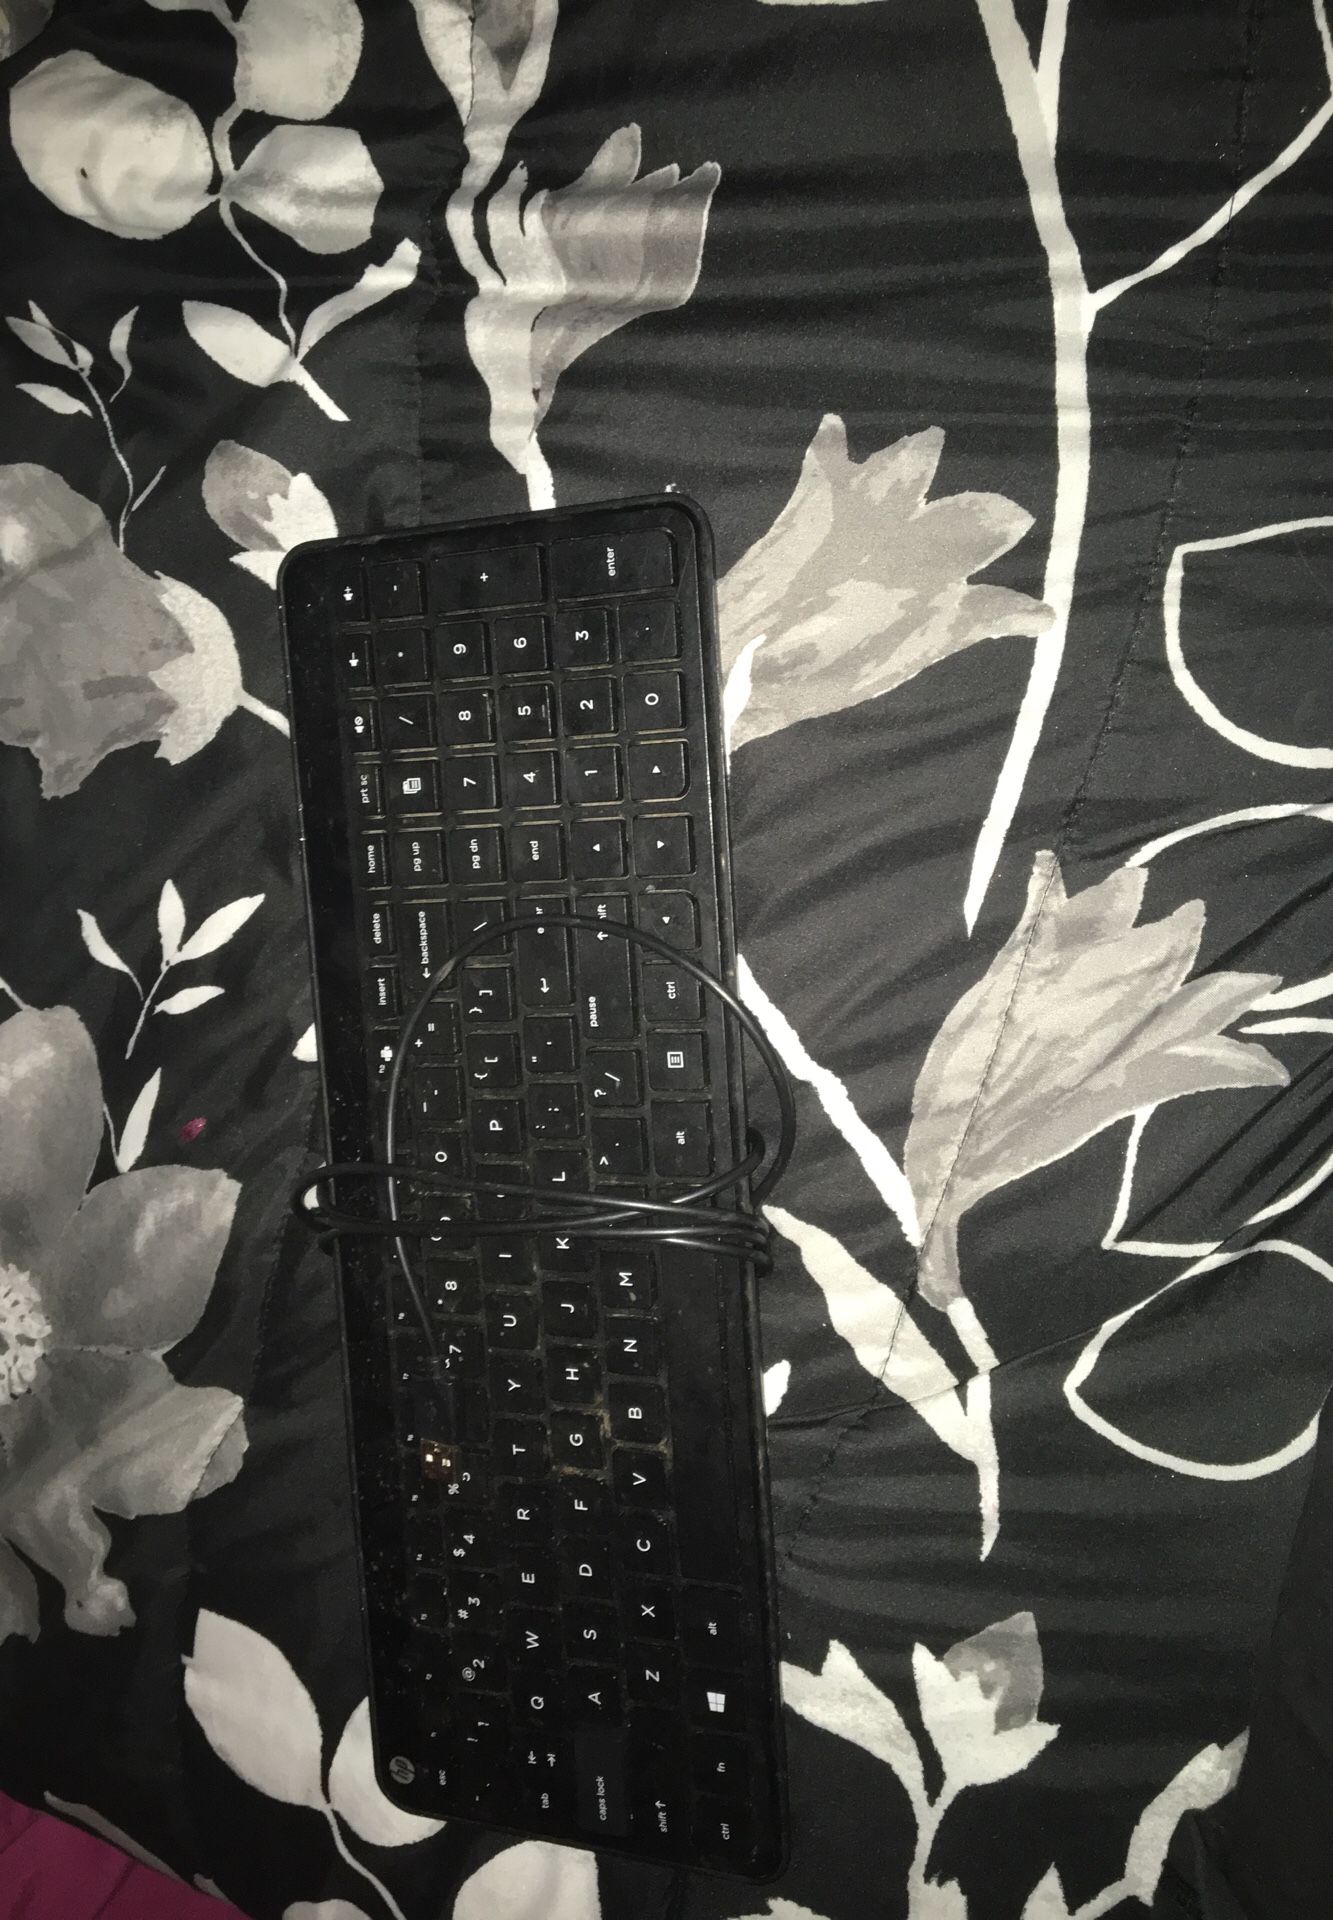 Keyboard for laptop or computer